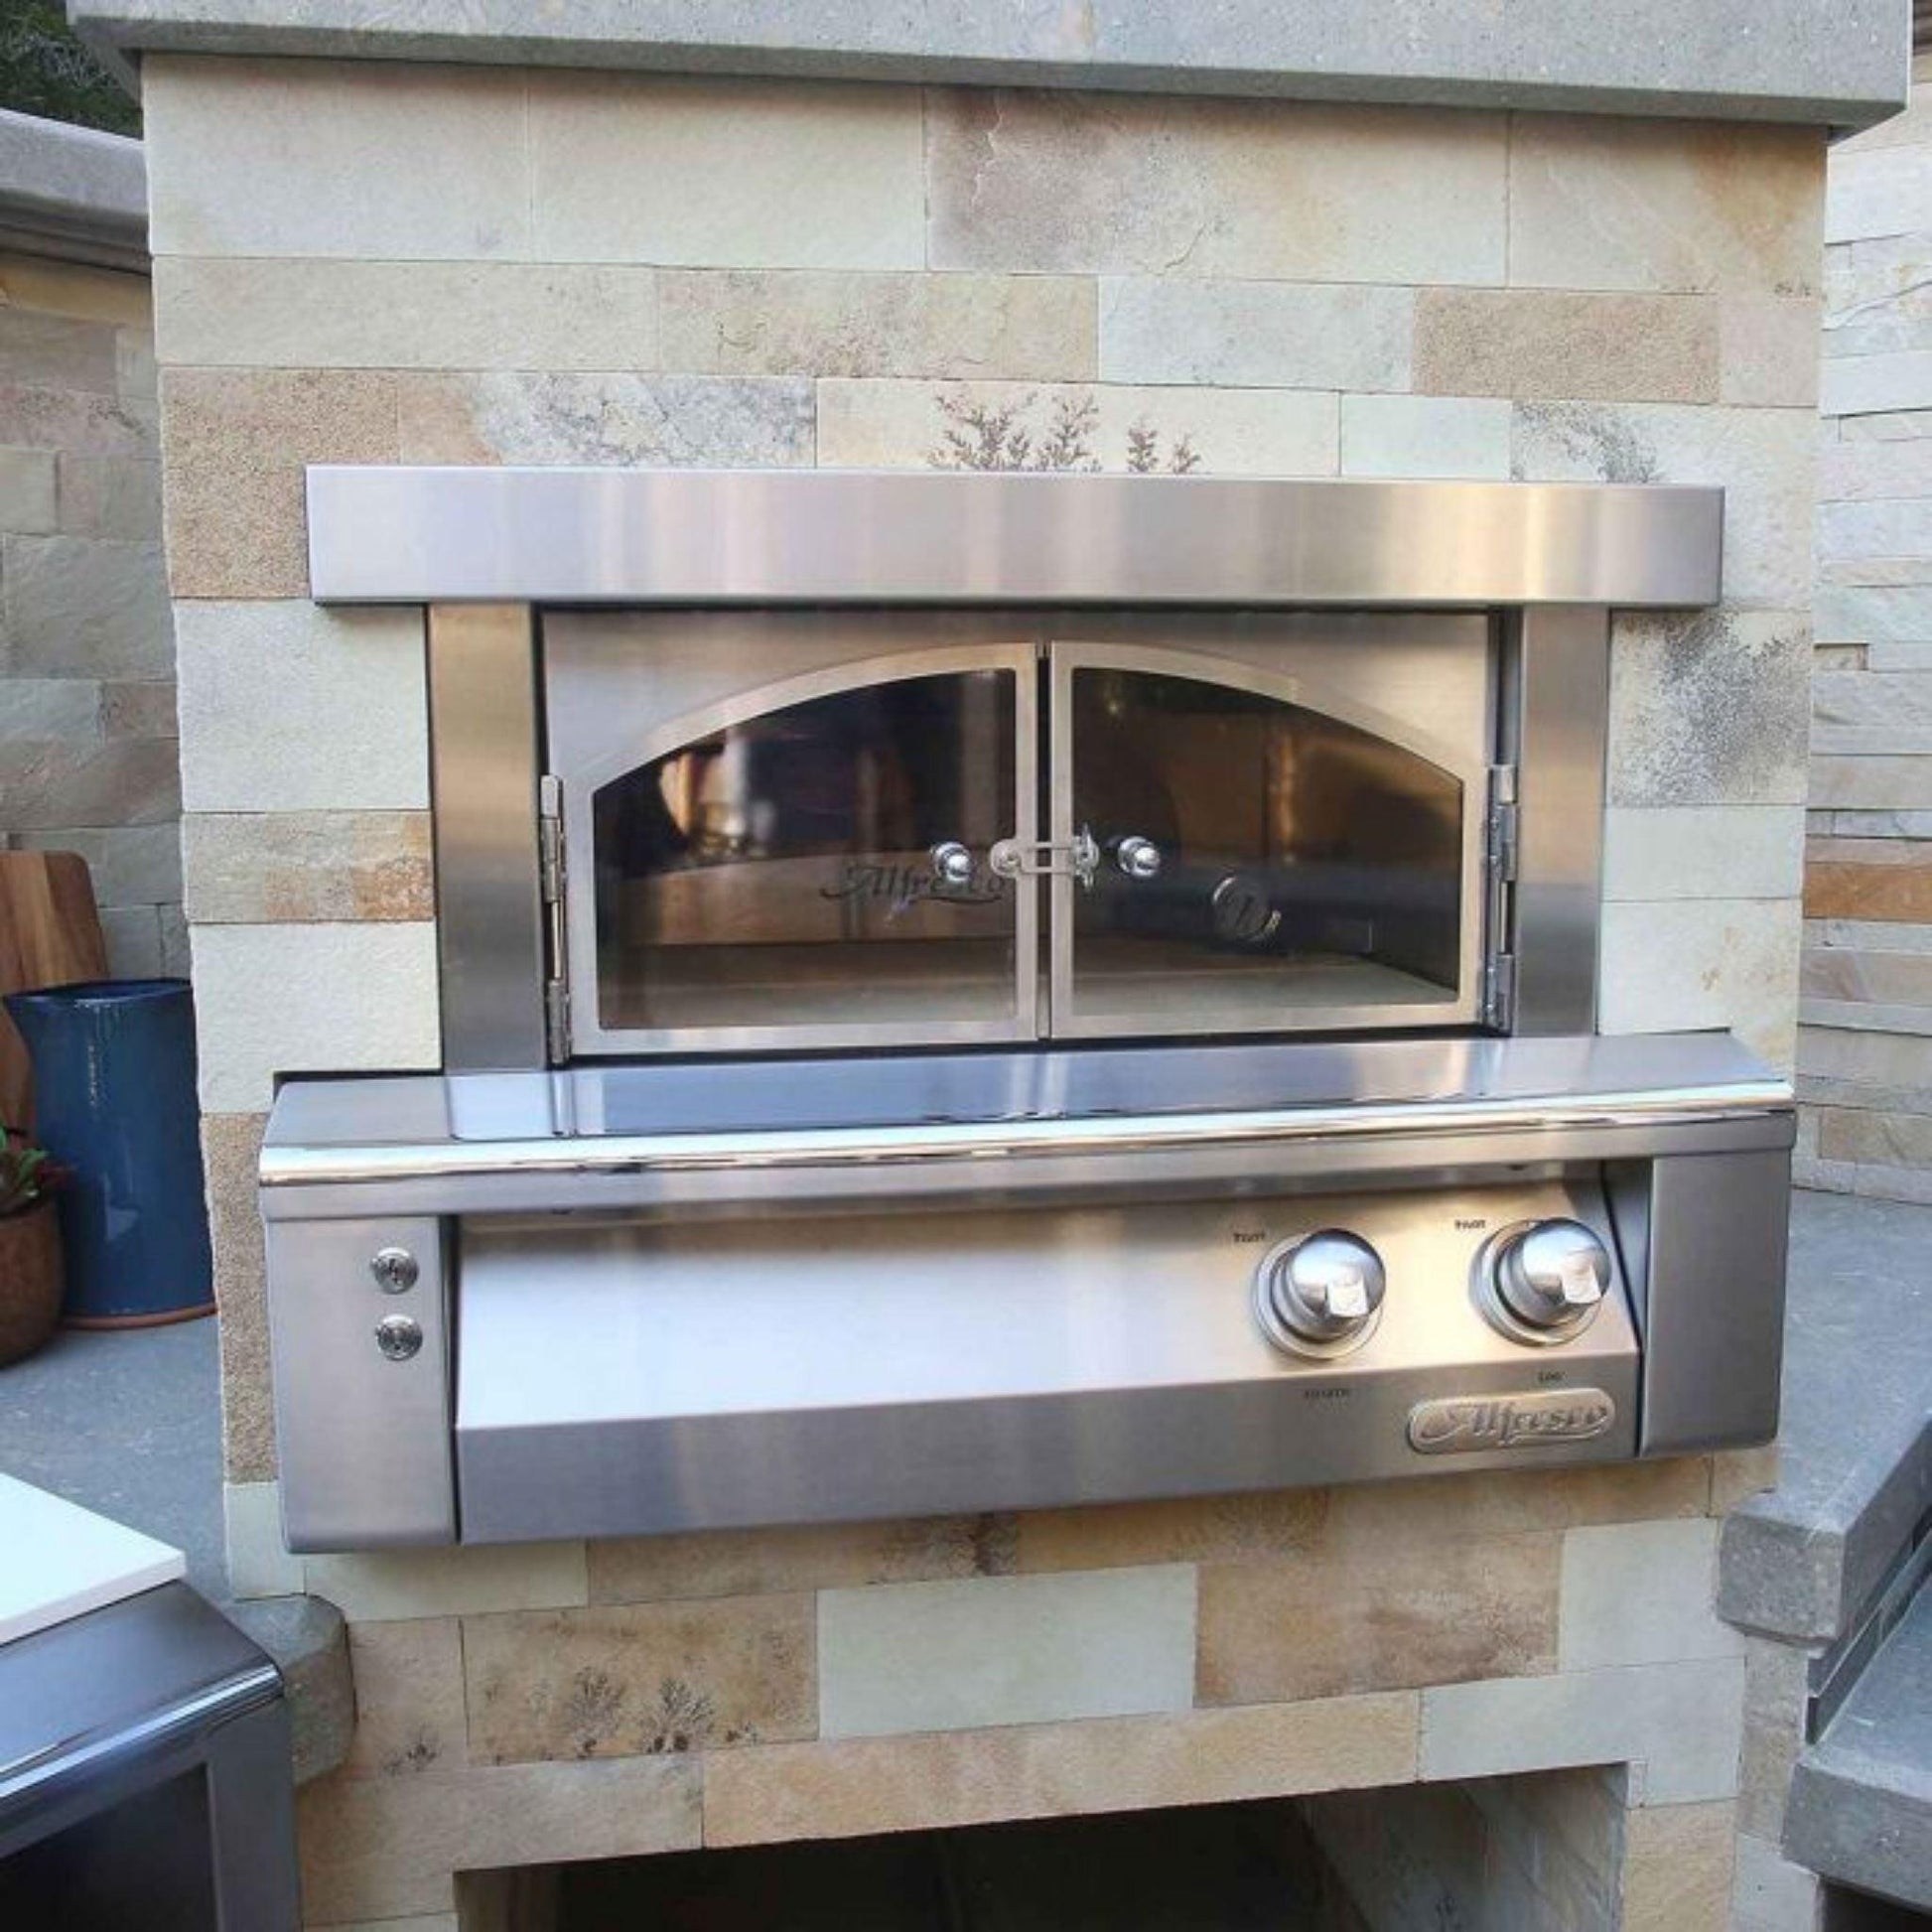 Alfresco 30" Blue Lilac Gloss Natural Gas Pizza Oven for Built-in Installations